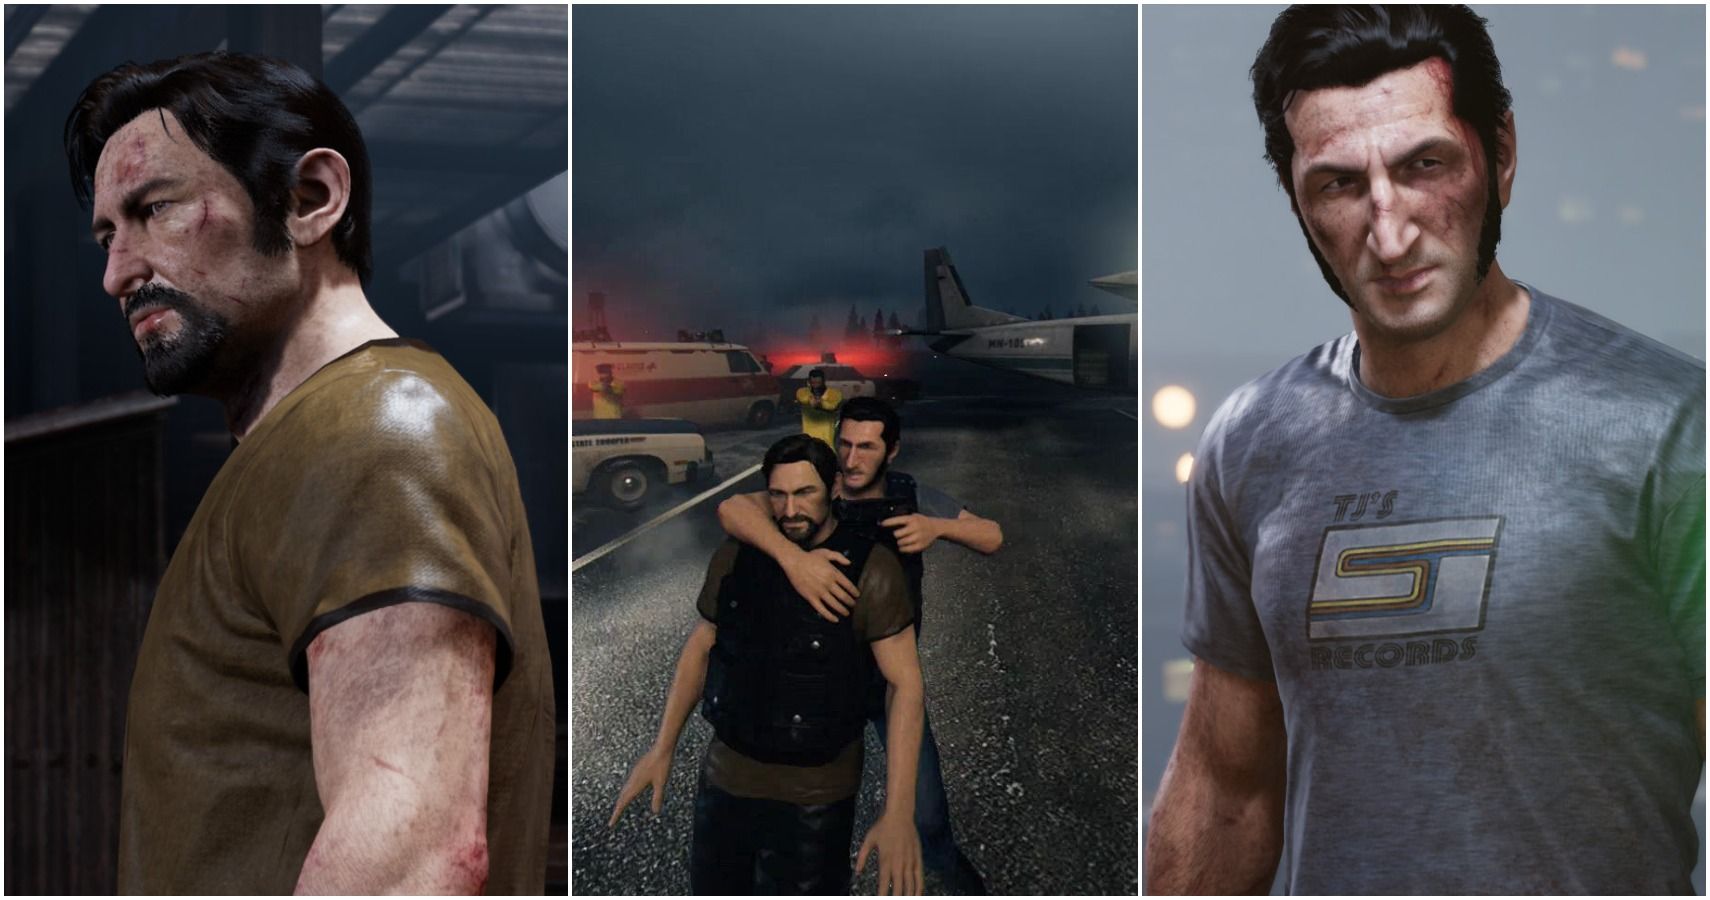 10 Games With *MULTIPLE* Endings 